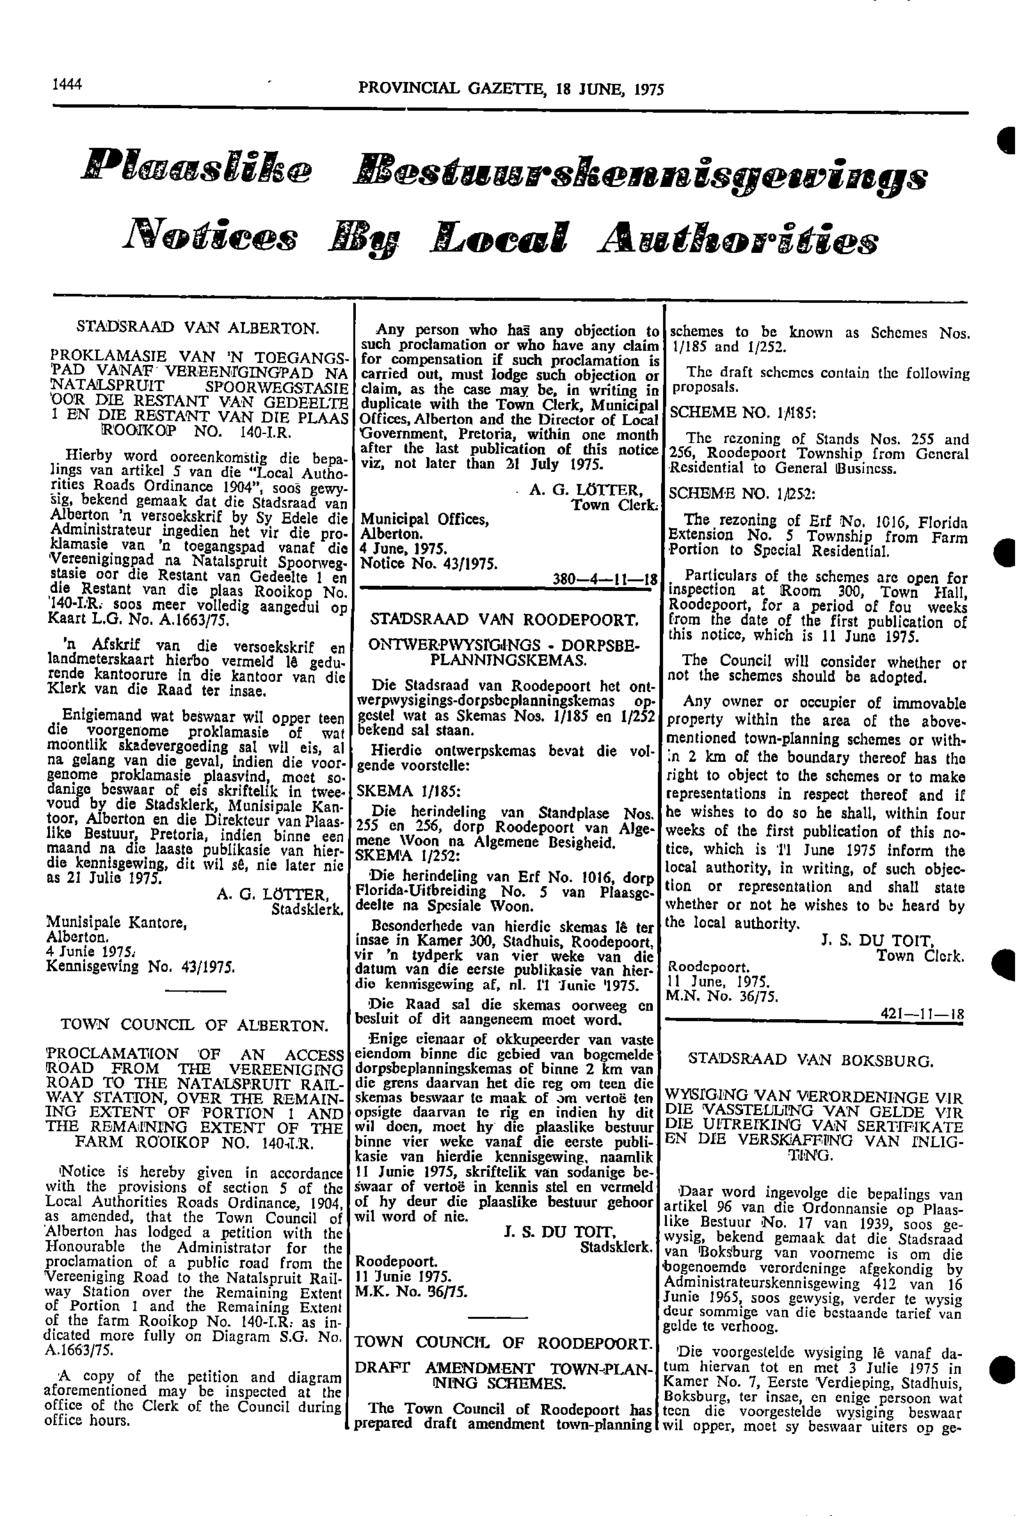 444 PROVNCAL GAZETTE 8 JUNE 975 Plaaslike Bestaggragennisgewsngs Notices / y Local Aug horst Nes ill STADSRAAD VAN ALBERTON Any person who has any objection to schemes to be known as Schemes Nos such